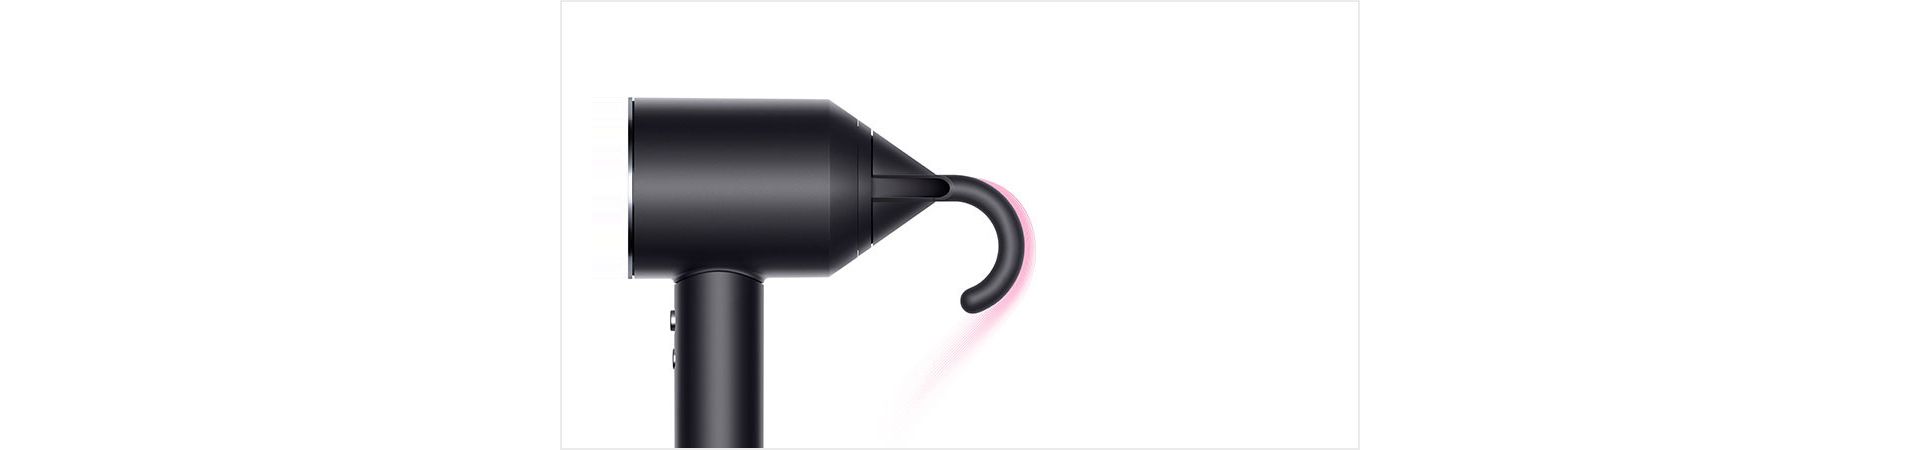 Dyson Supersonic™ hair dryer Black/Nickel with New Flyaway attached